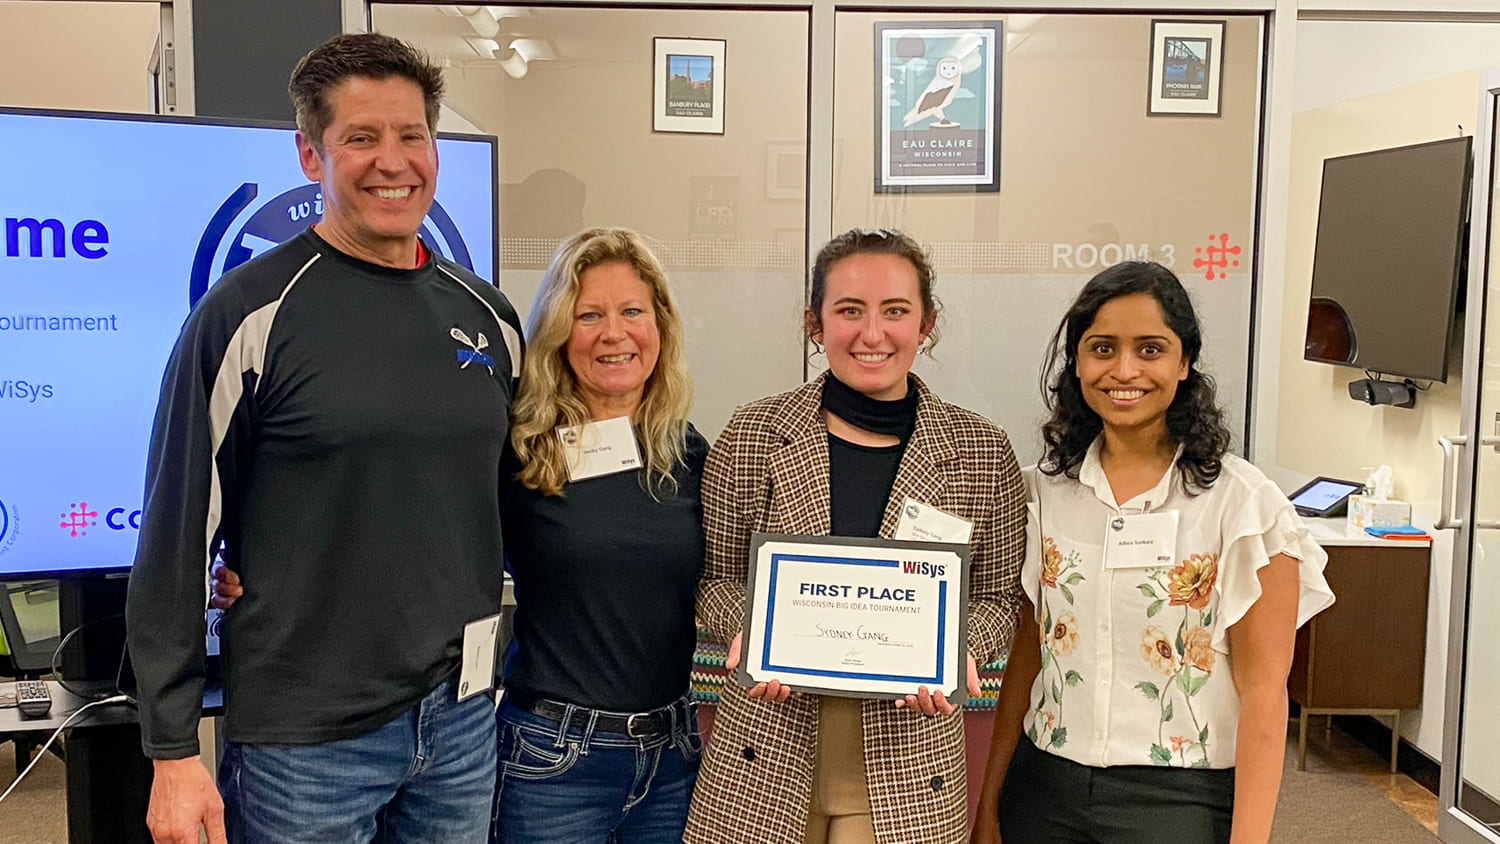 After winning the Wisconsin Big Idea Tournament, Sydney Gang holds up the first place certificate standing next to parents Jon and Becky Gang, left, and WiSys Assistant Director Adhira Sunkara, right.